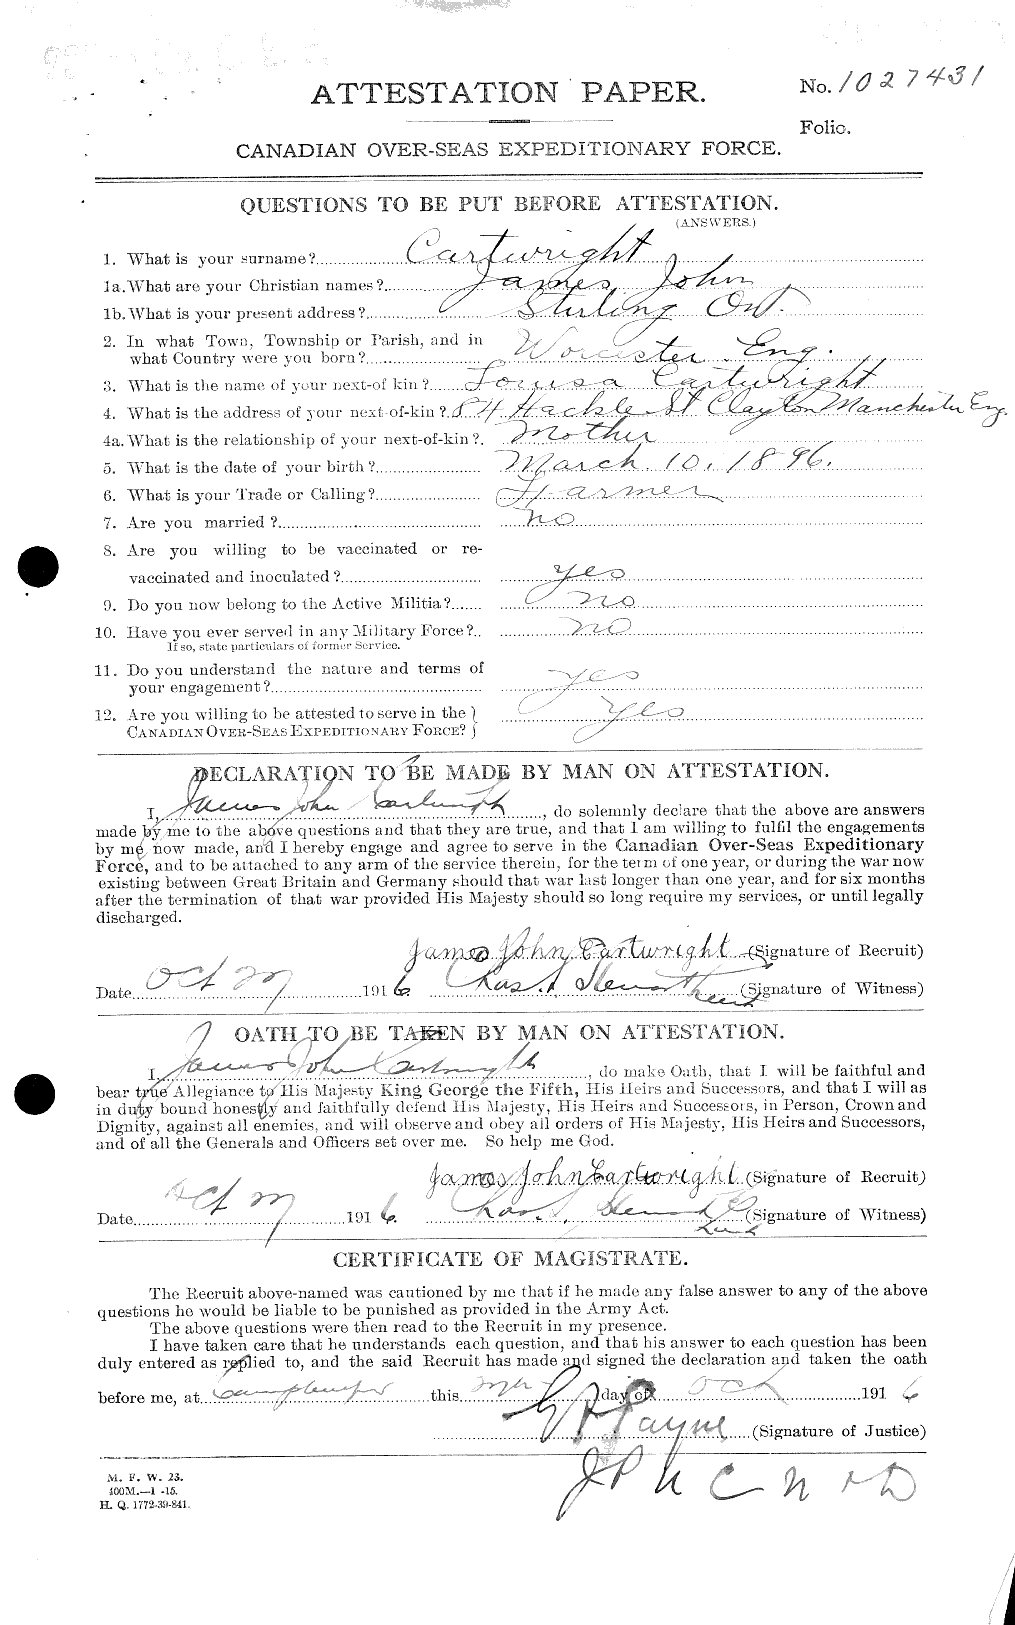 Personnel Records of the First World War - CEF 011595a